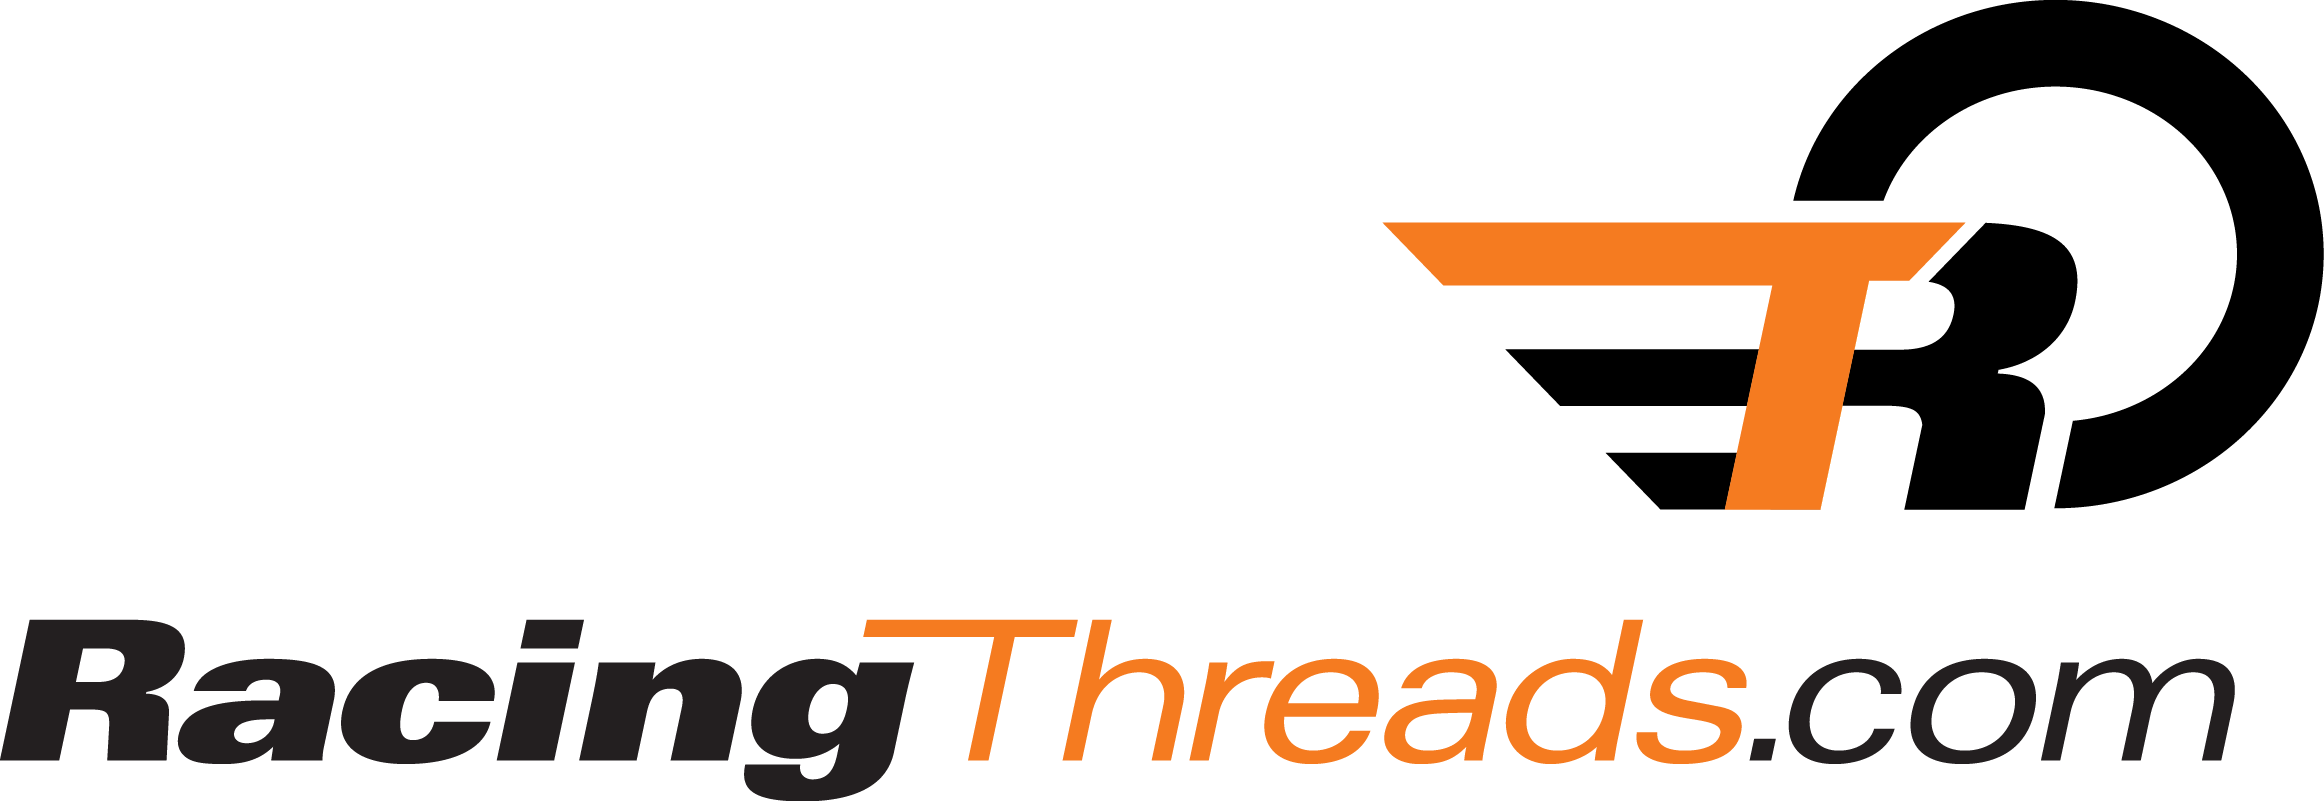 Description Racing Threads Is An Online Store For Racing - Active Network (2324x801), Png Download